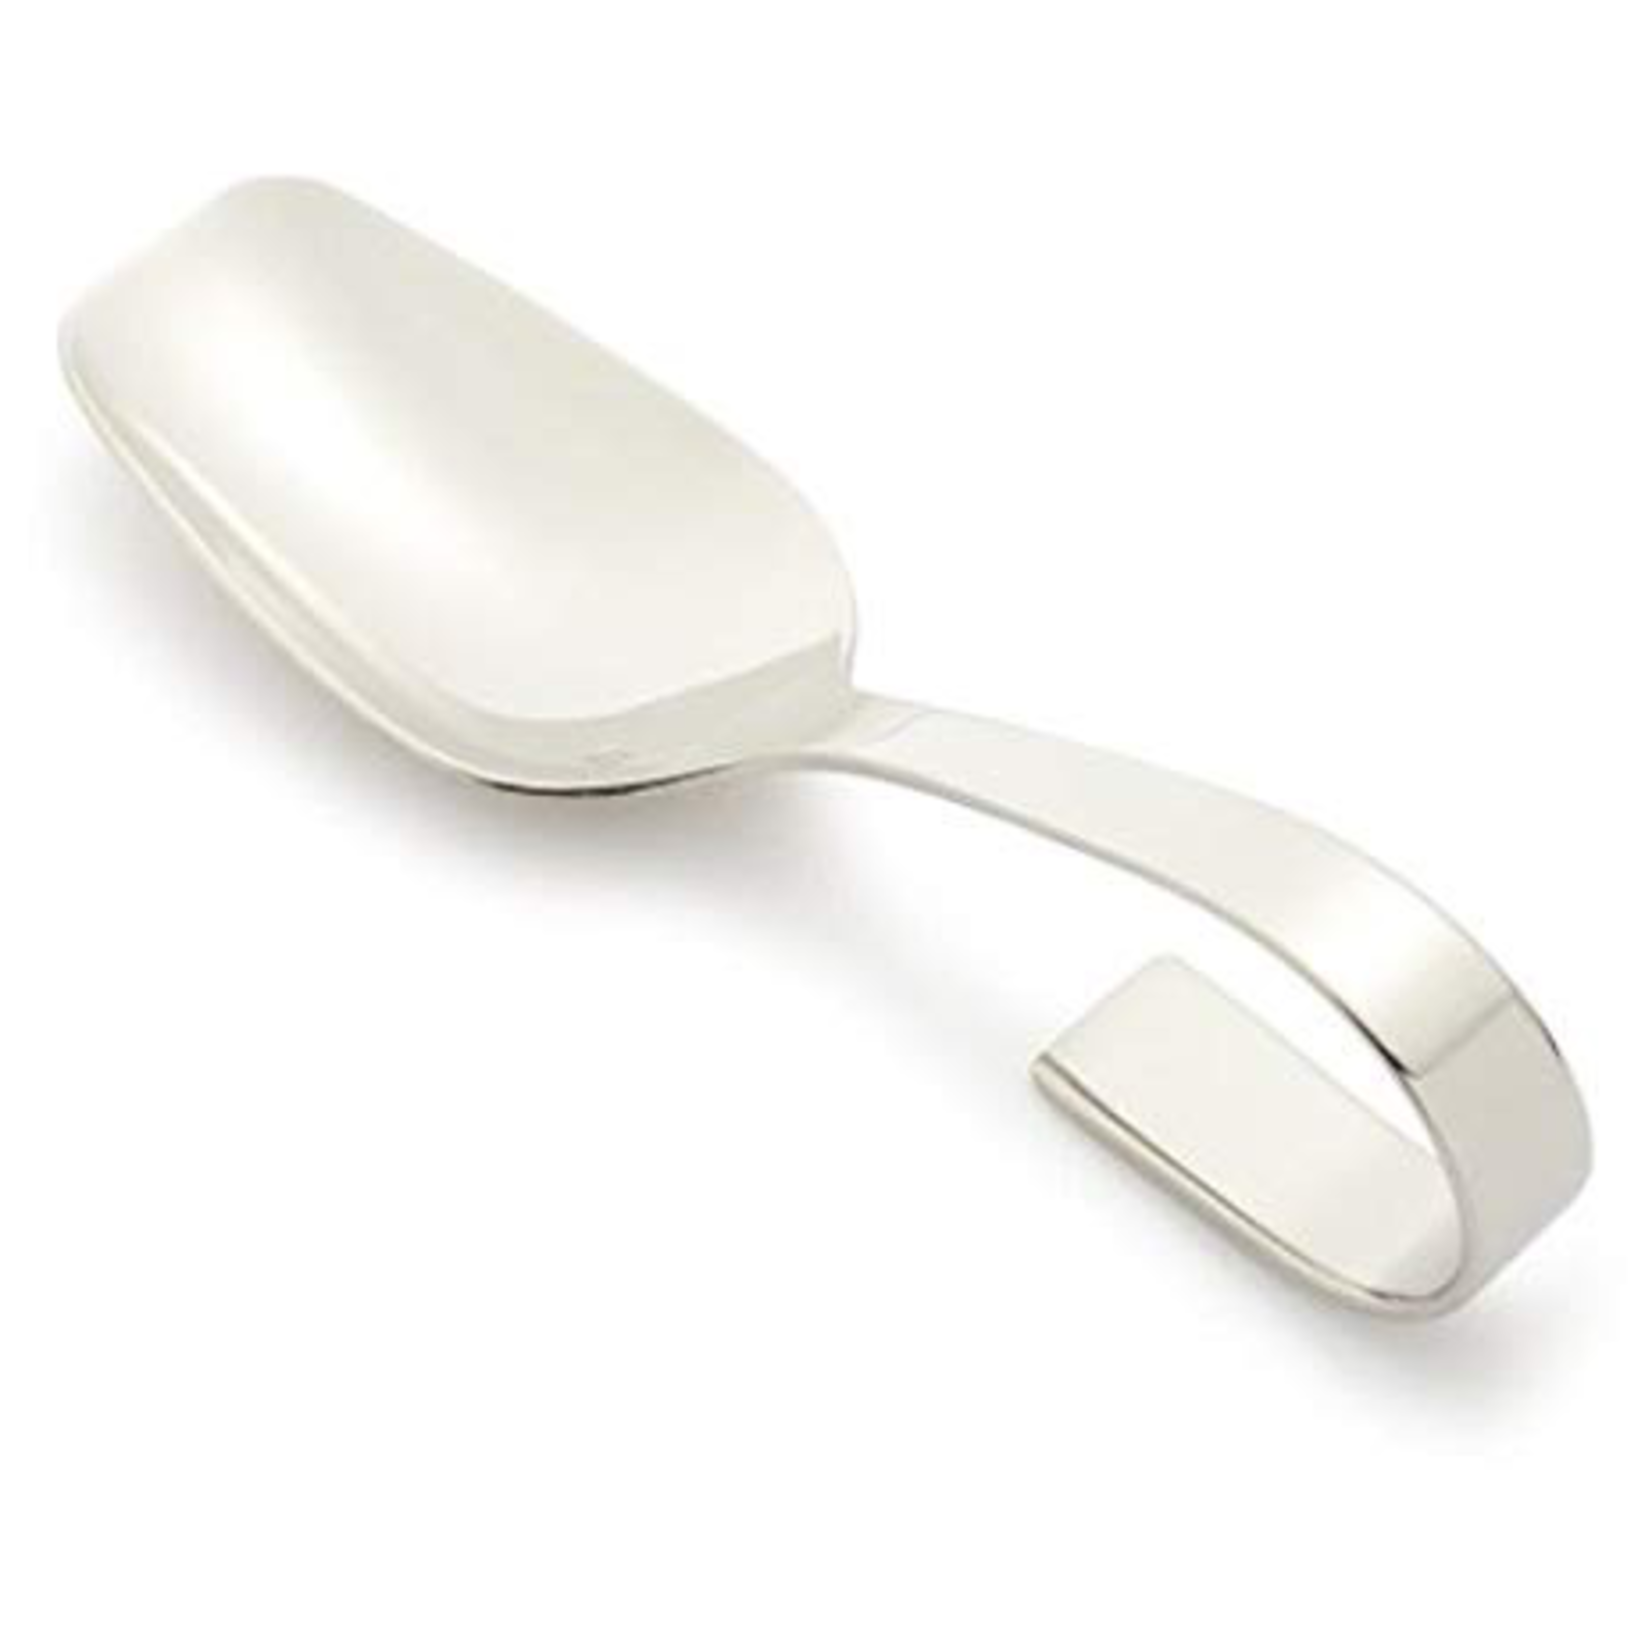 FORTESSA 1.5.622.00.069 Grand city curly looped tasting spoon 5.3"  12/bx